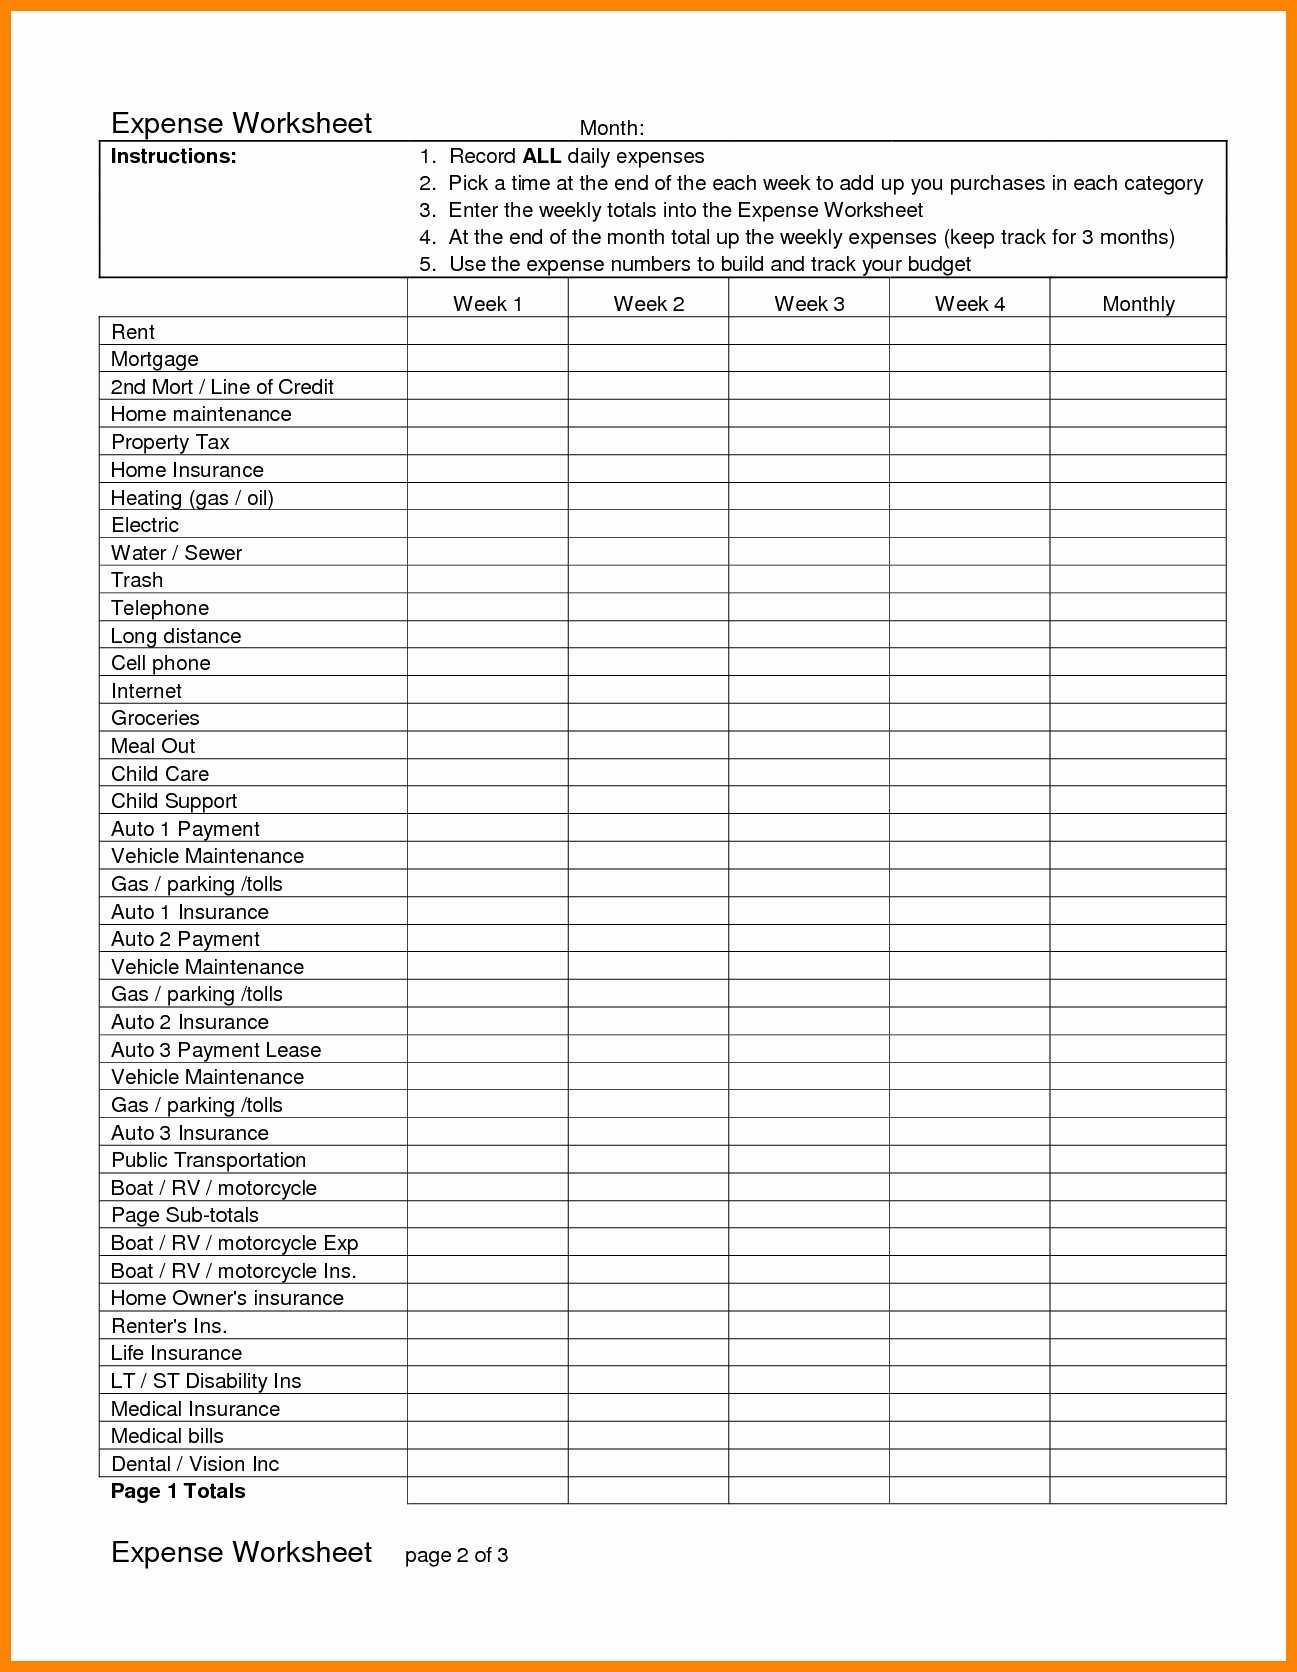 Best Budget Worksheet as Well as Daily Expenses Worksheet Joselinohouse